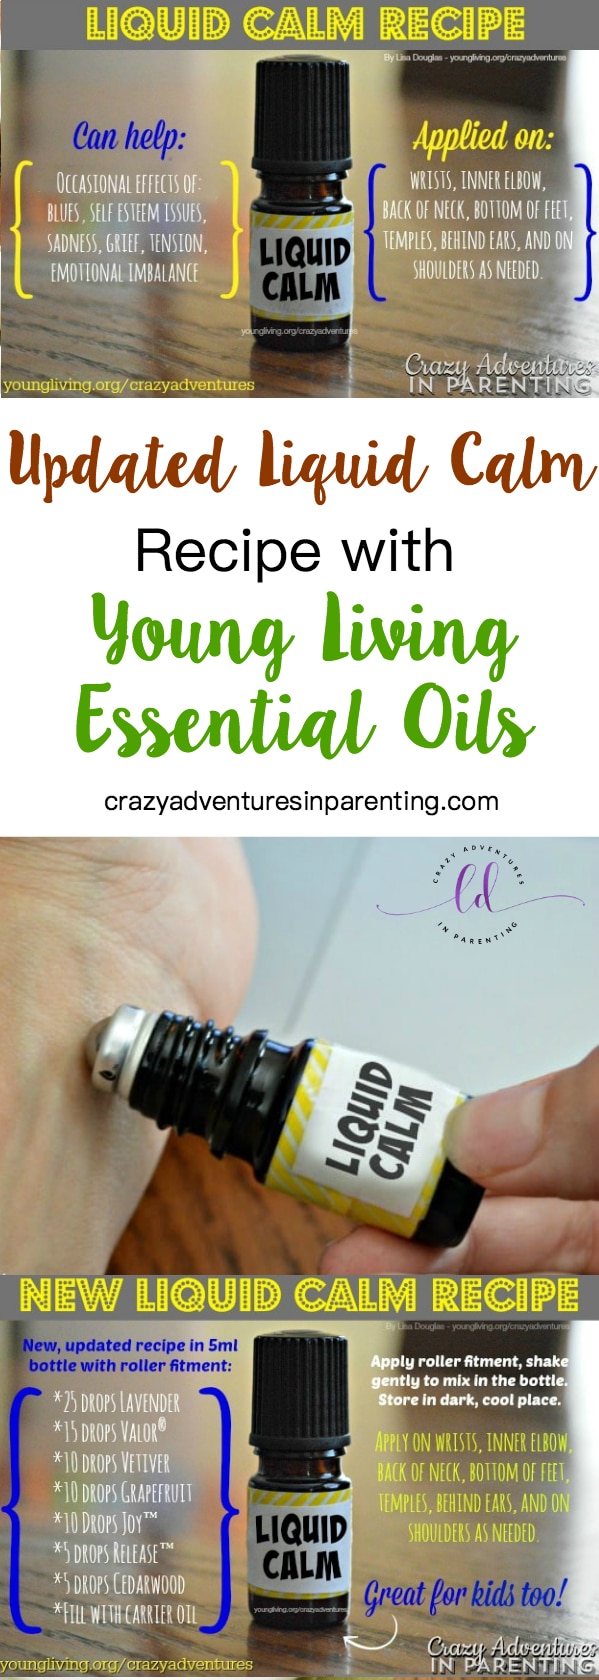 Updated Liquid Calm Recipe with Young Living Oils